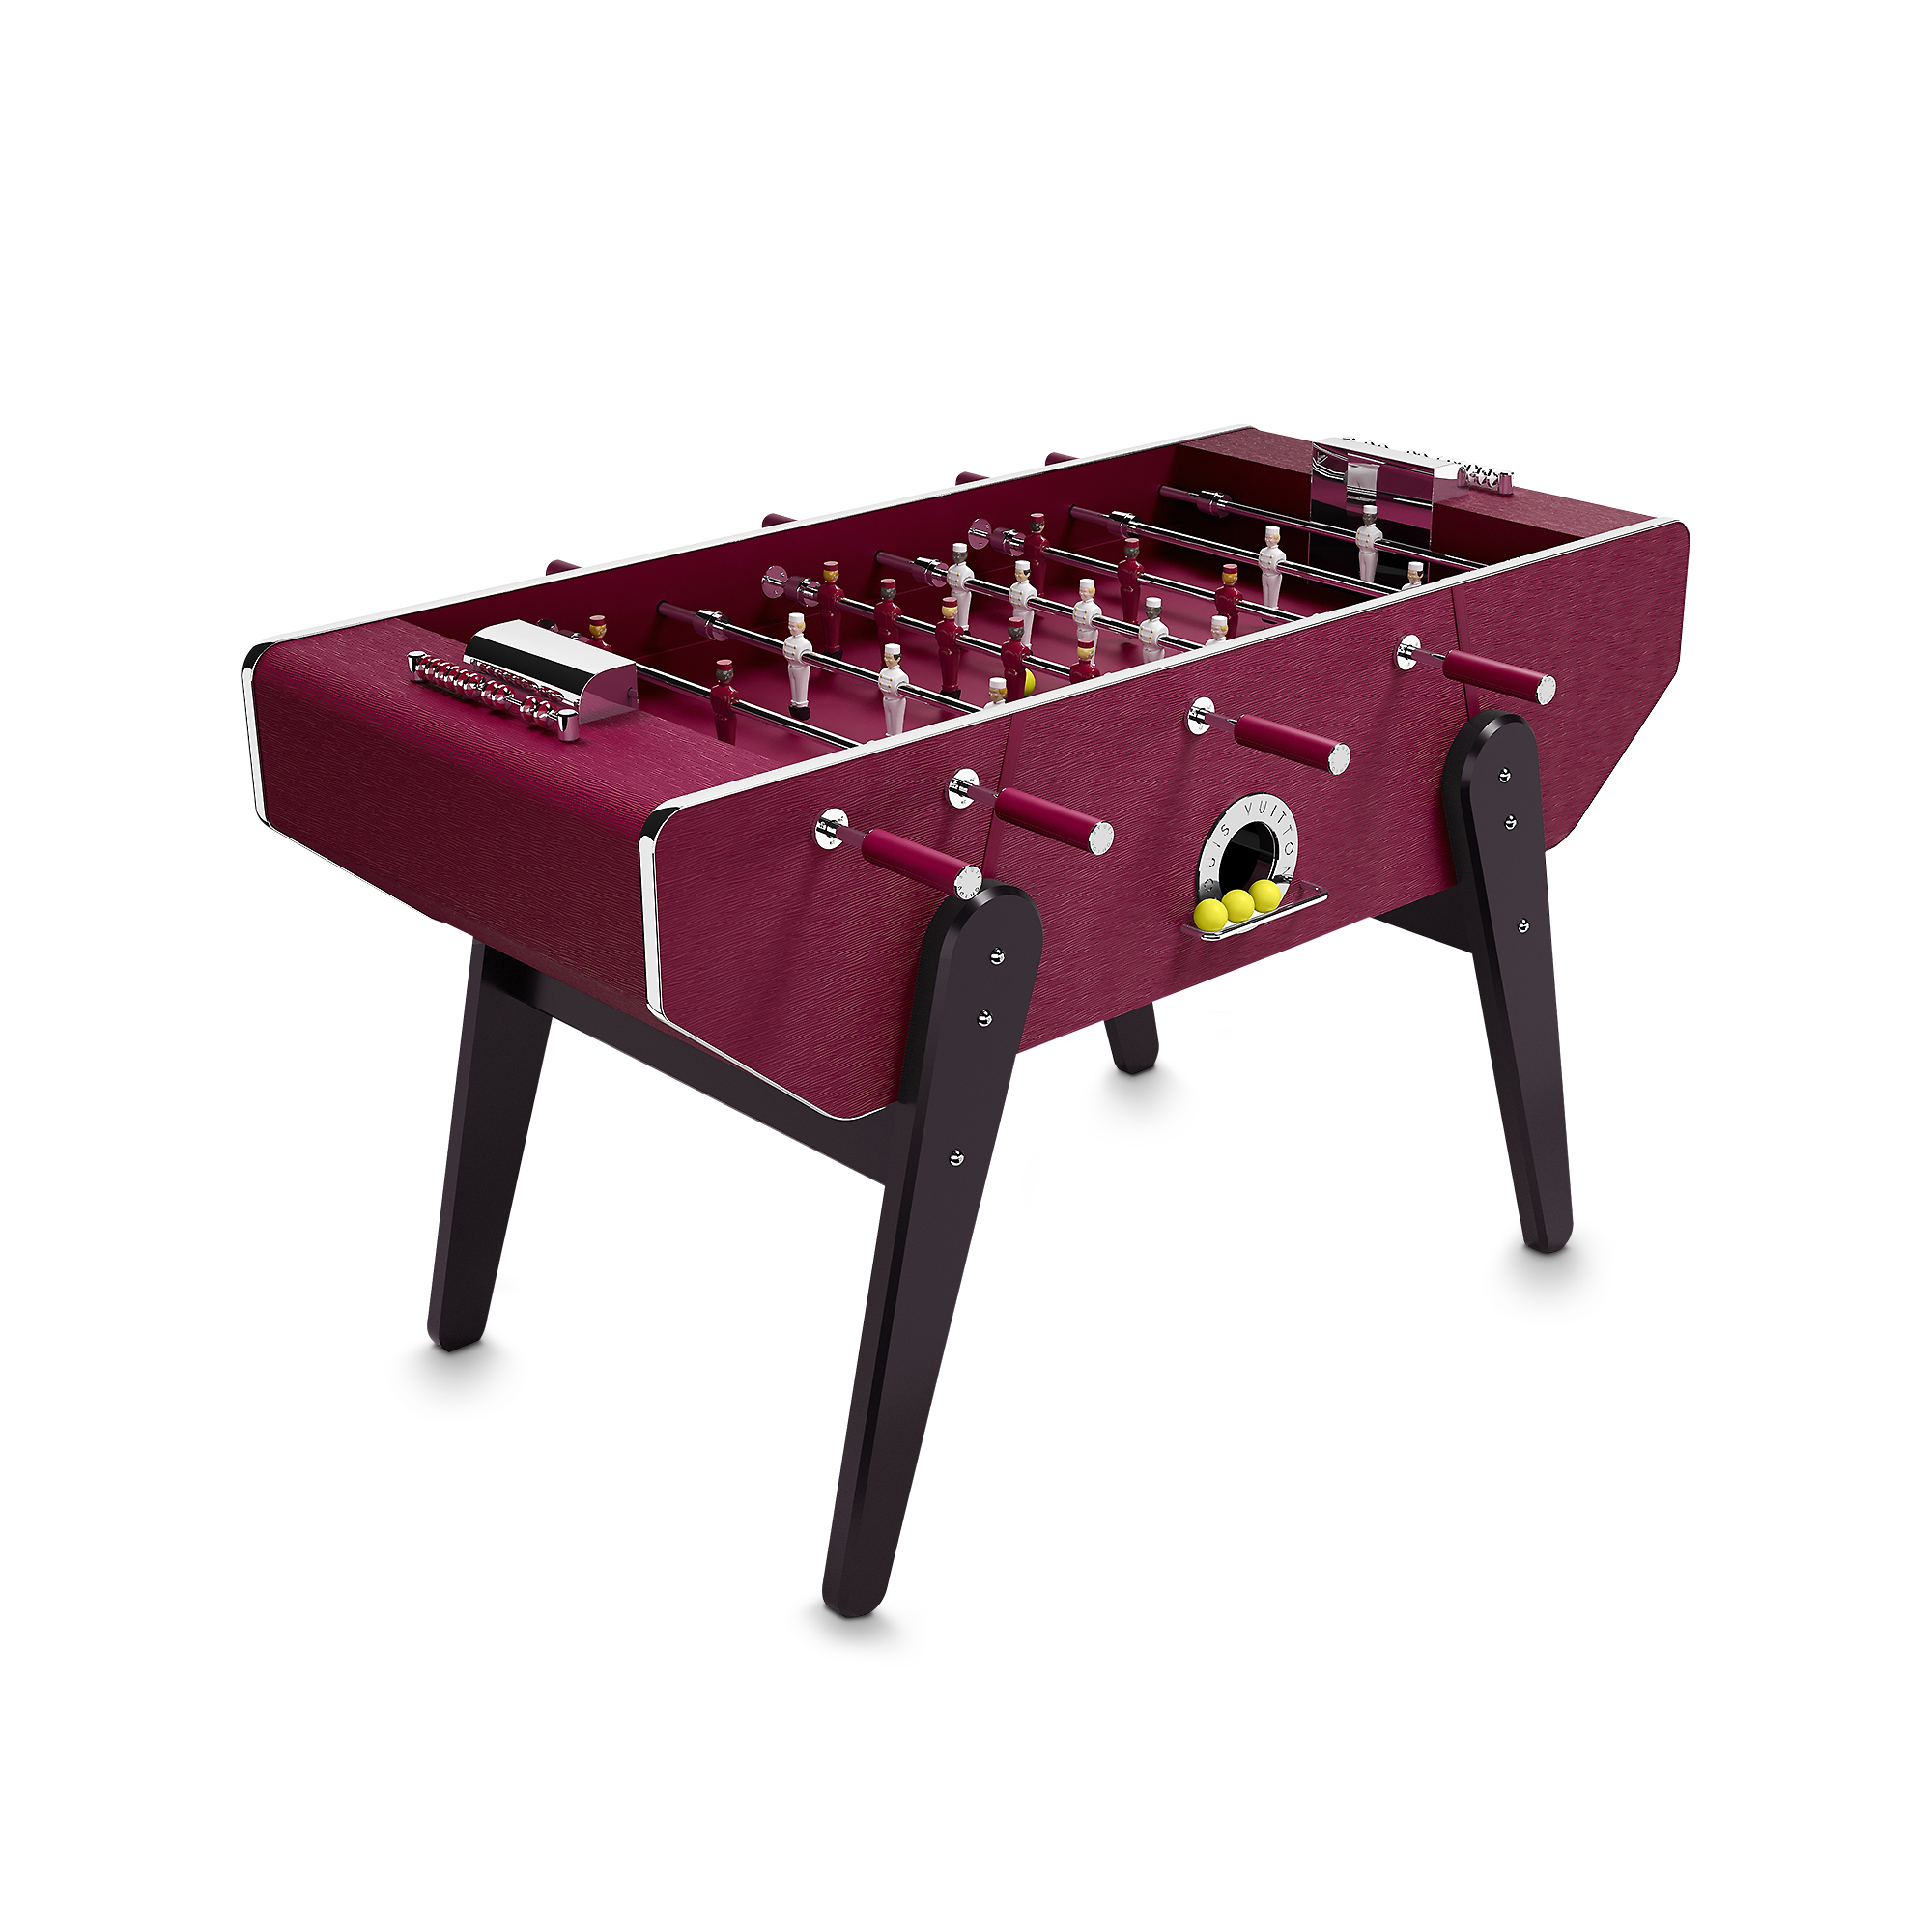 Louis Vuitton Epi Leather Foosball Table Epi Leather - Art of Living - Sports and Lifestyle R97330